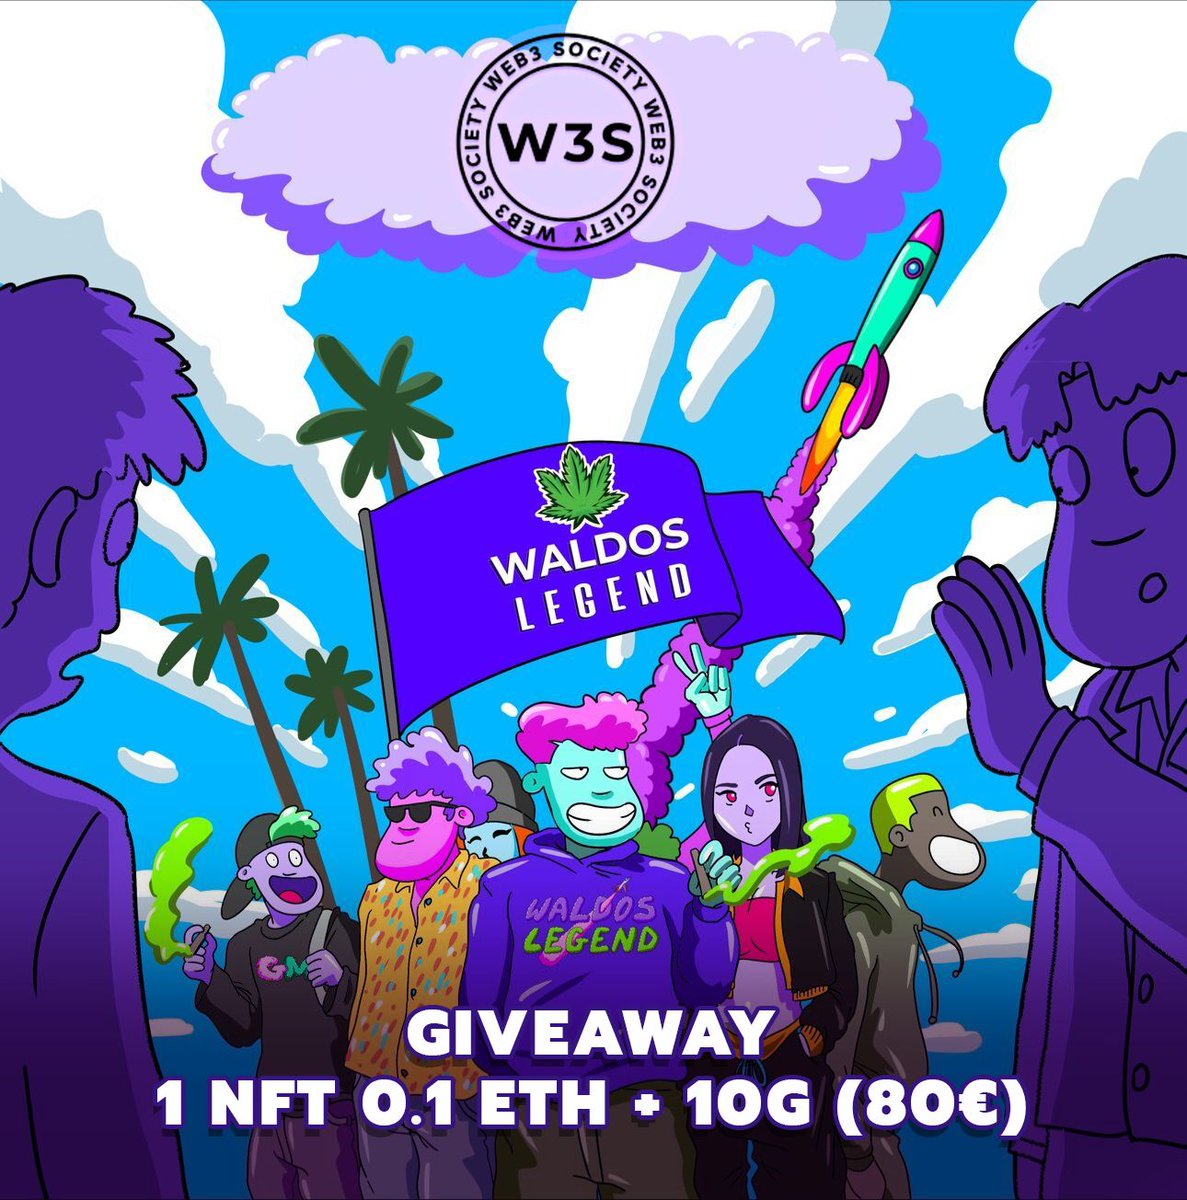 🎁Giveaway PBW X W3S event tomorrow 👇
1⃣⁠⁠follow @WaldosLegend  + @web3society_  🌿🎙️
2⃣Like + RT 🔄
3⃣Tag 3 mates 🤙

See you tomorrow at our Web3 X Culture event 👋